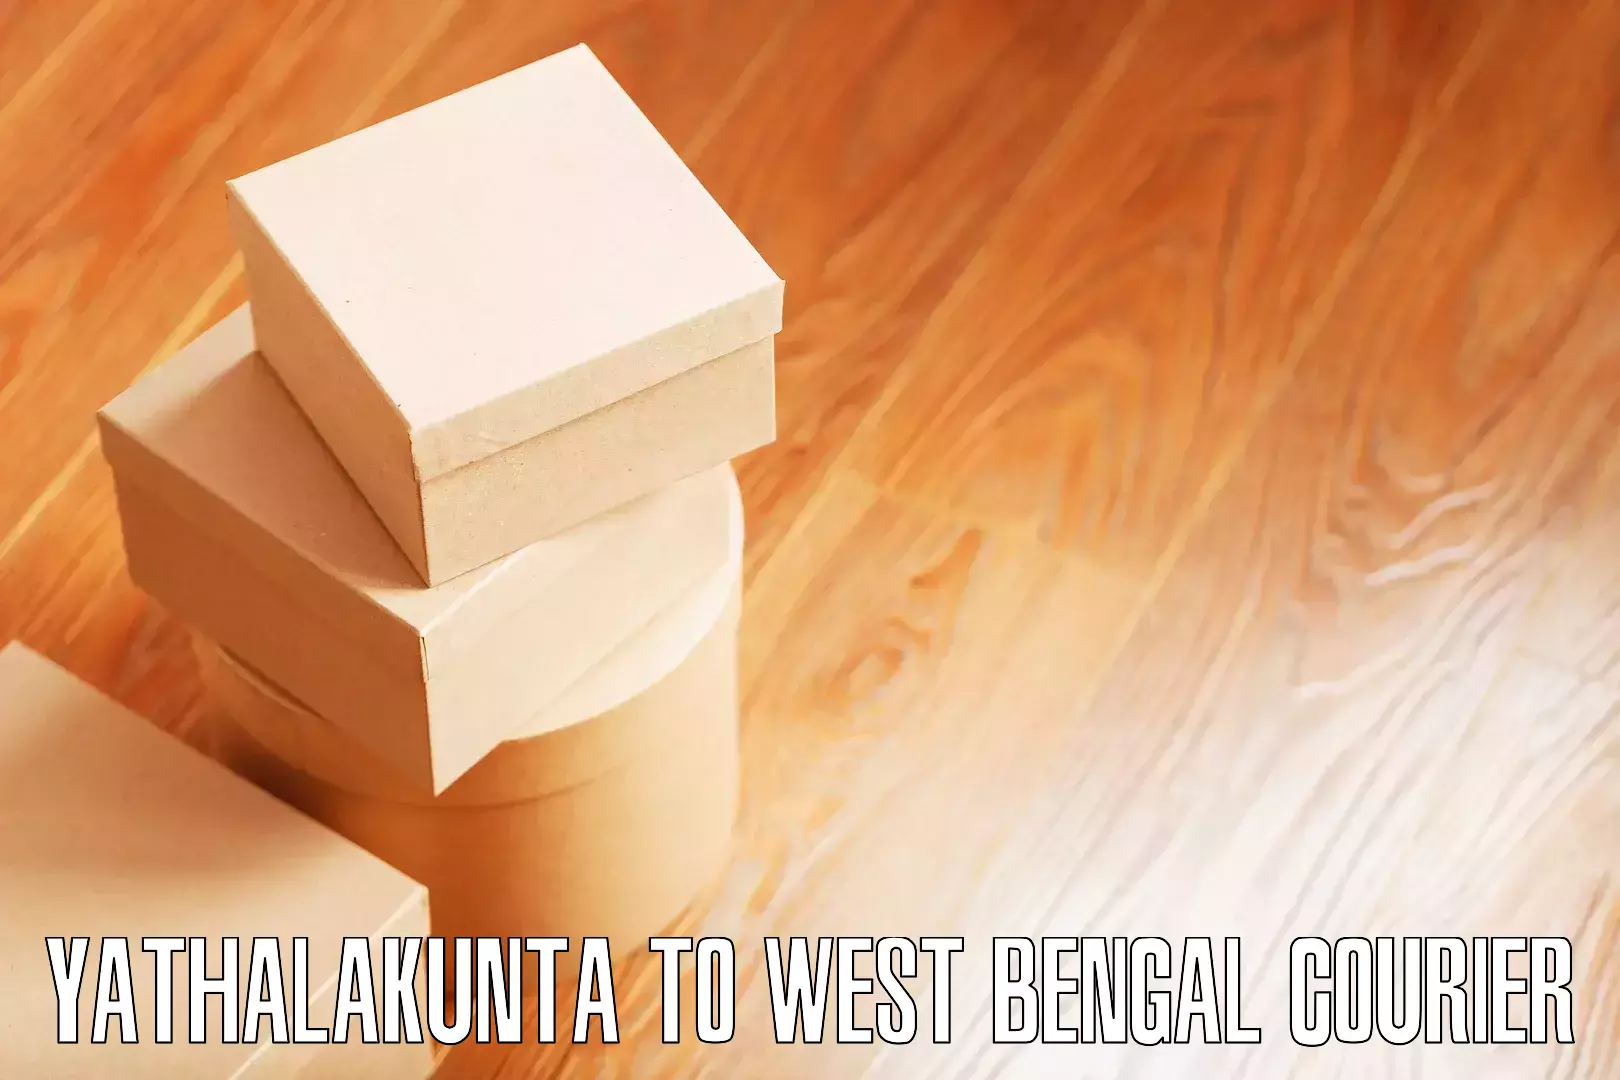 Comprehensive relocation services Yathalakunta to West Bengal